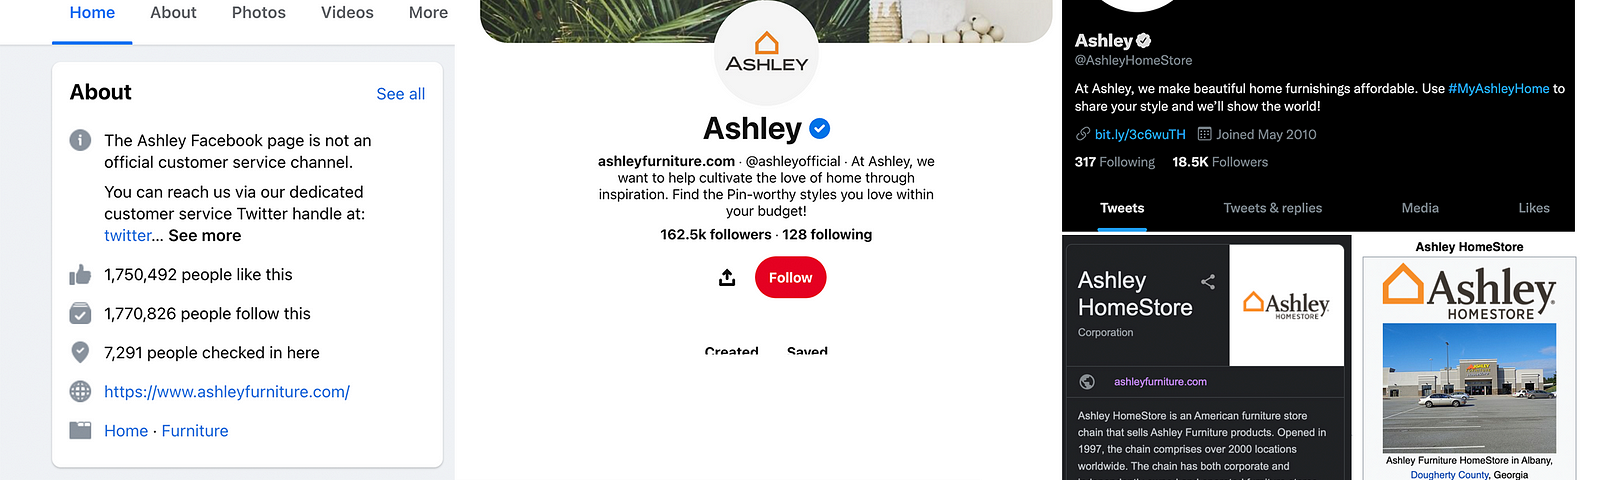 Picture of Ashley Home Furniture Social Media